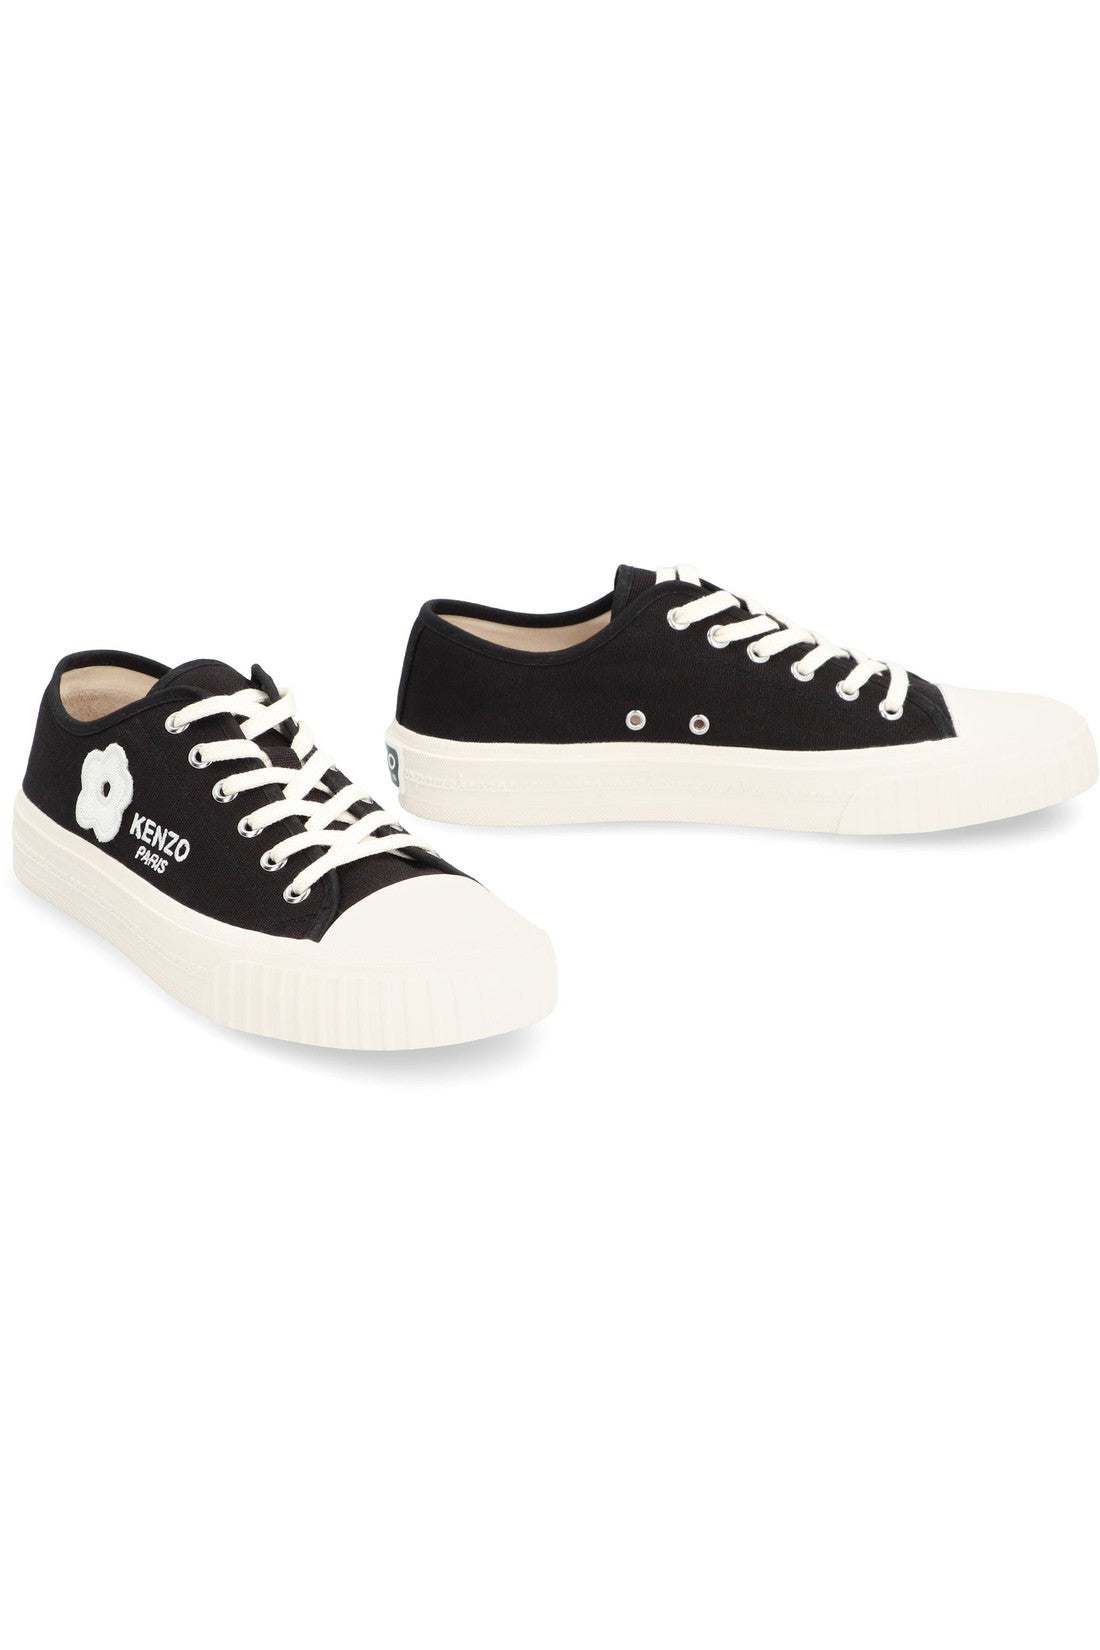 Kenzo-OUTLET-SALE-Kenzo Foxy canvas sneakers-ARCHIVIST